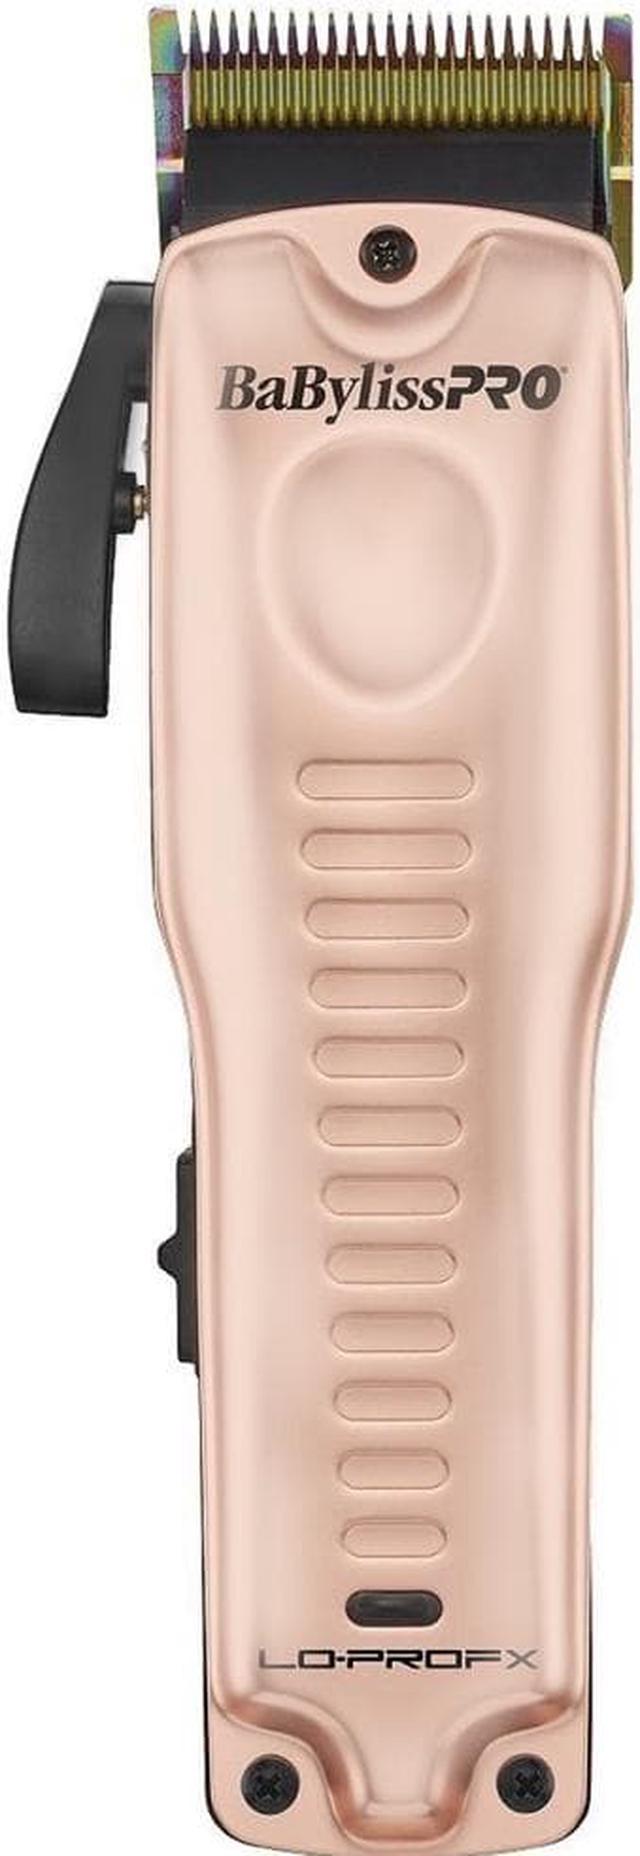 BaByliss Pro Limited Edition LO-PROFX High-Performance Clipper & Trimmer  Gift Set (ROSE GOLD) #FXHOLPKLP-RG